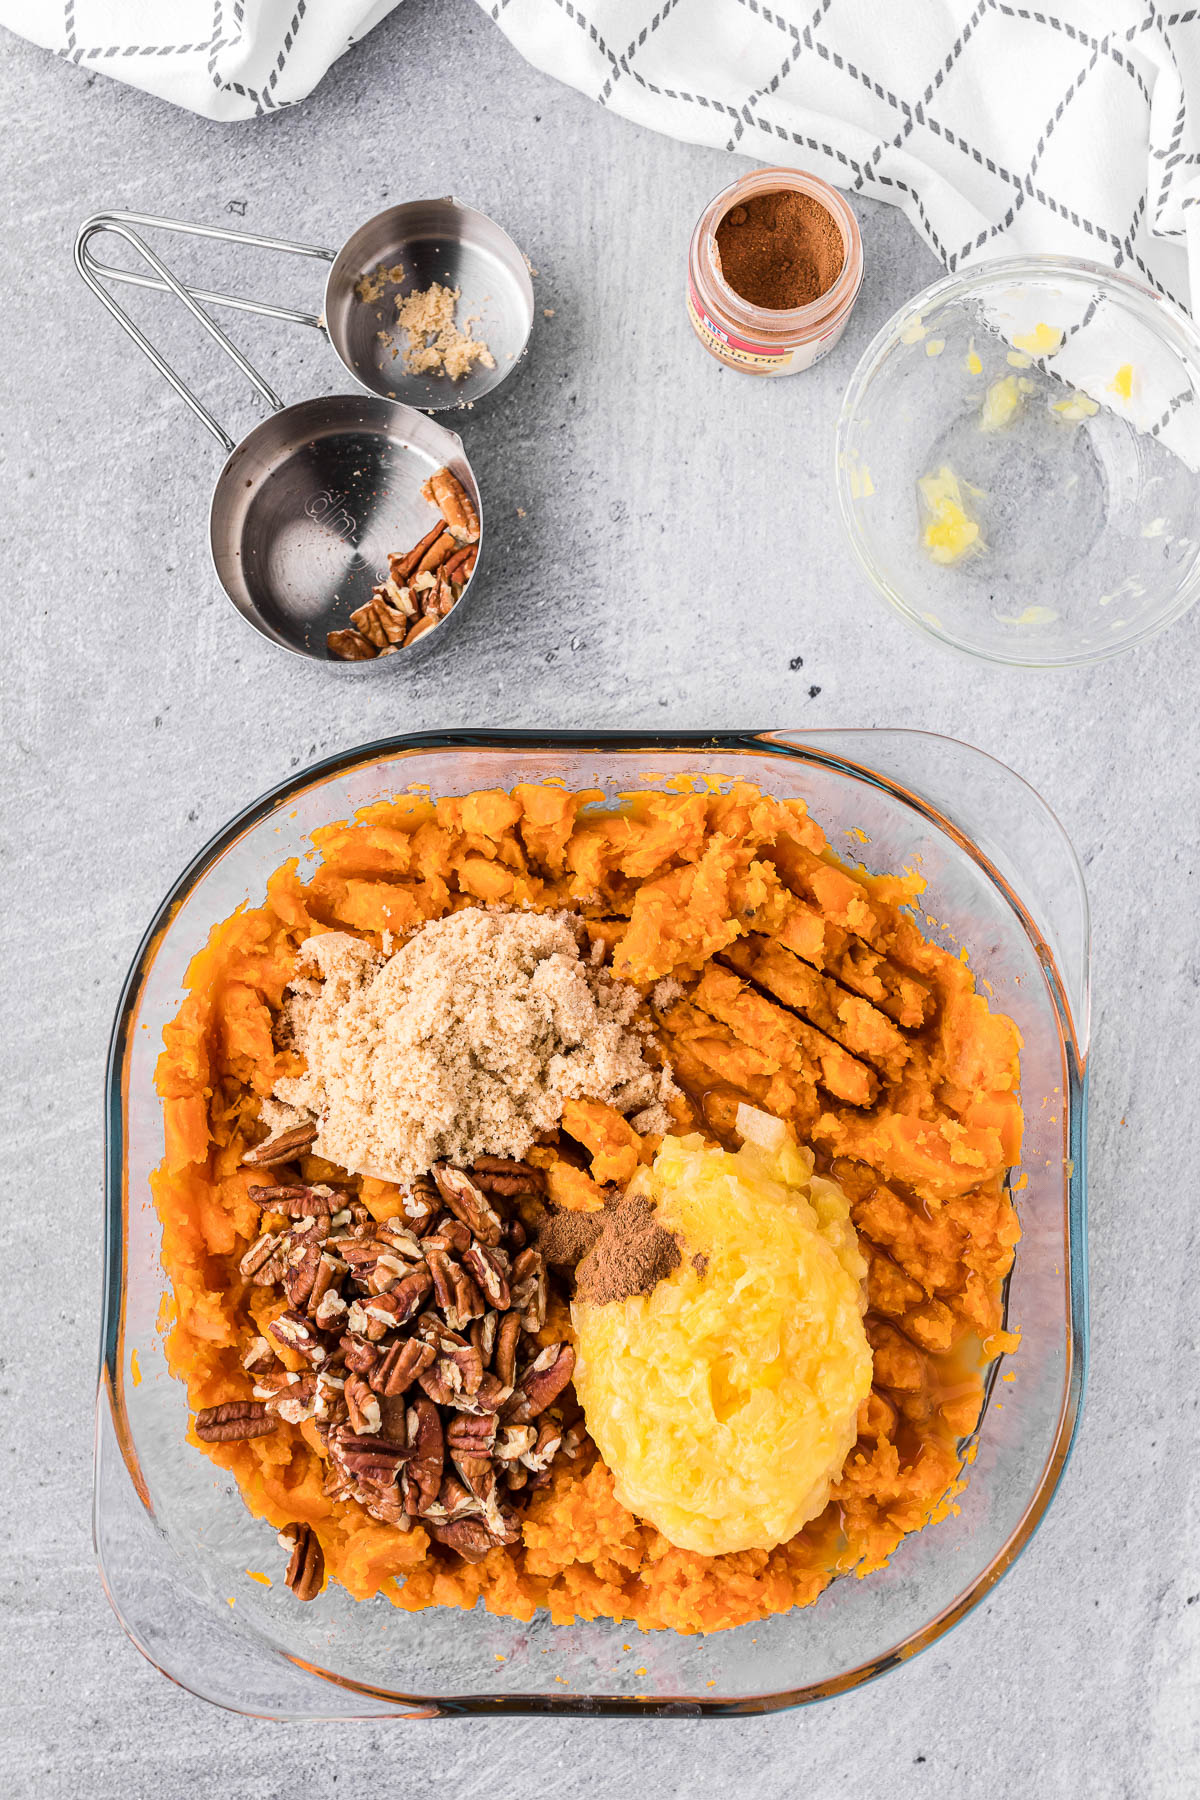 mashed sweet potatoes with crushed pineapple, pecans, and brown sugar.